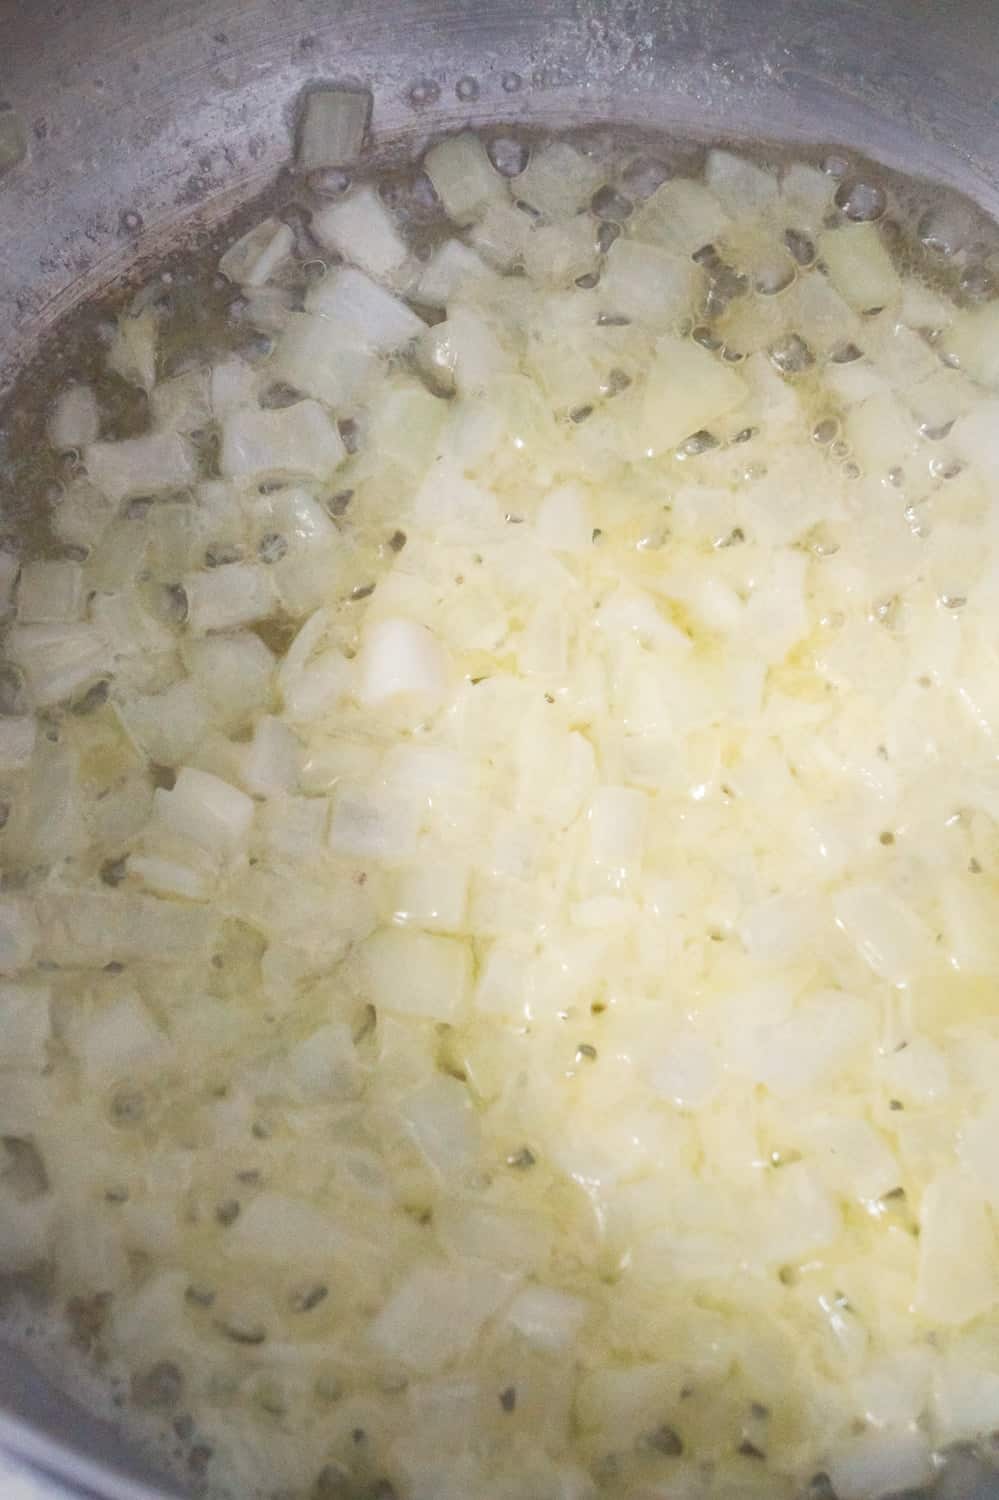 diced onions cooking in a large pot